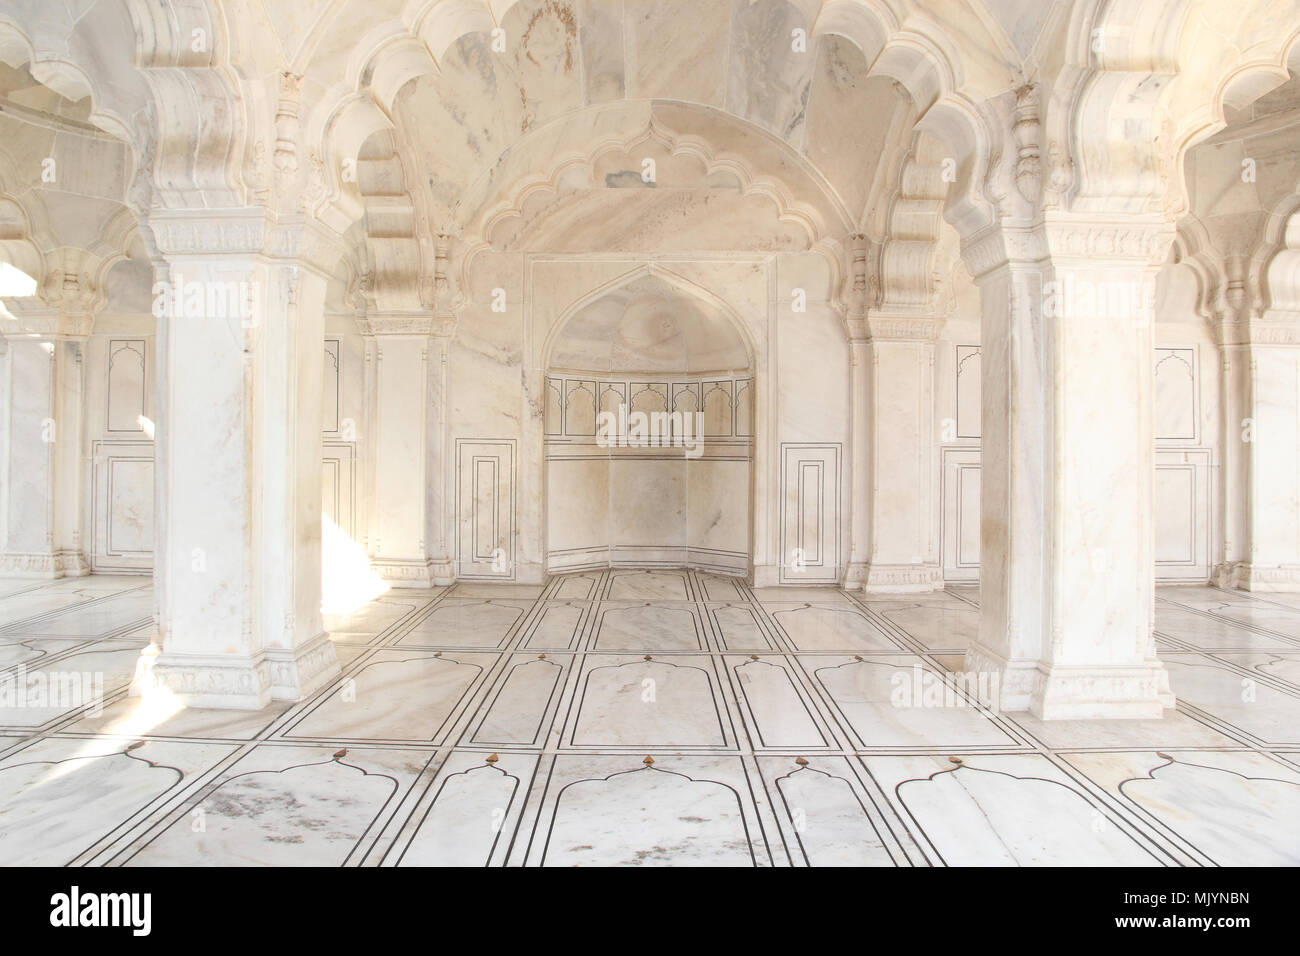 Marble mosque in India Stock Photo